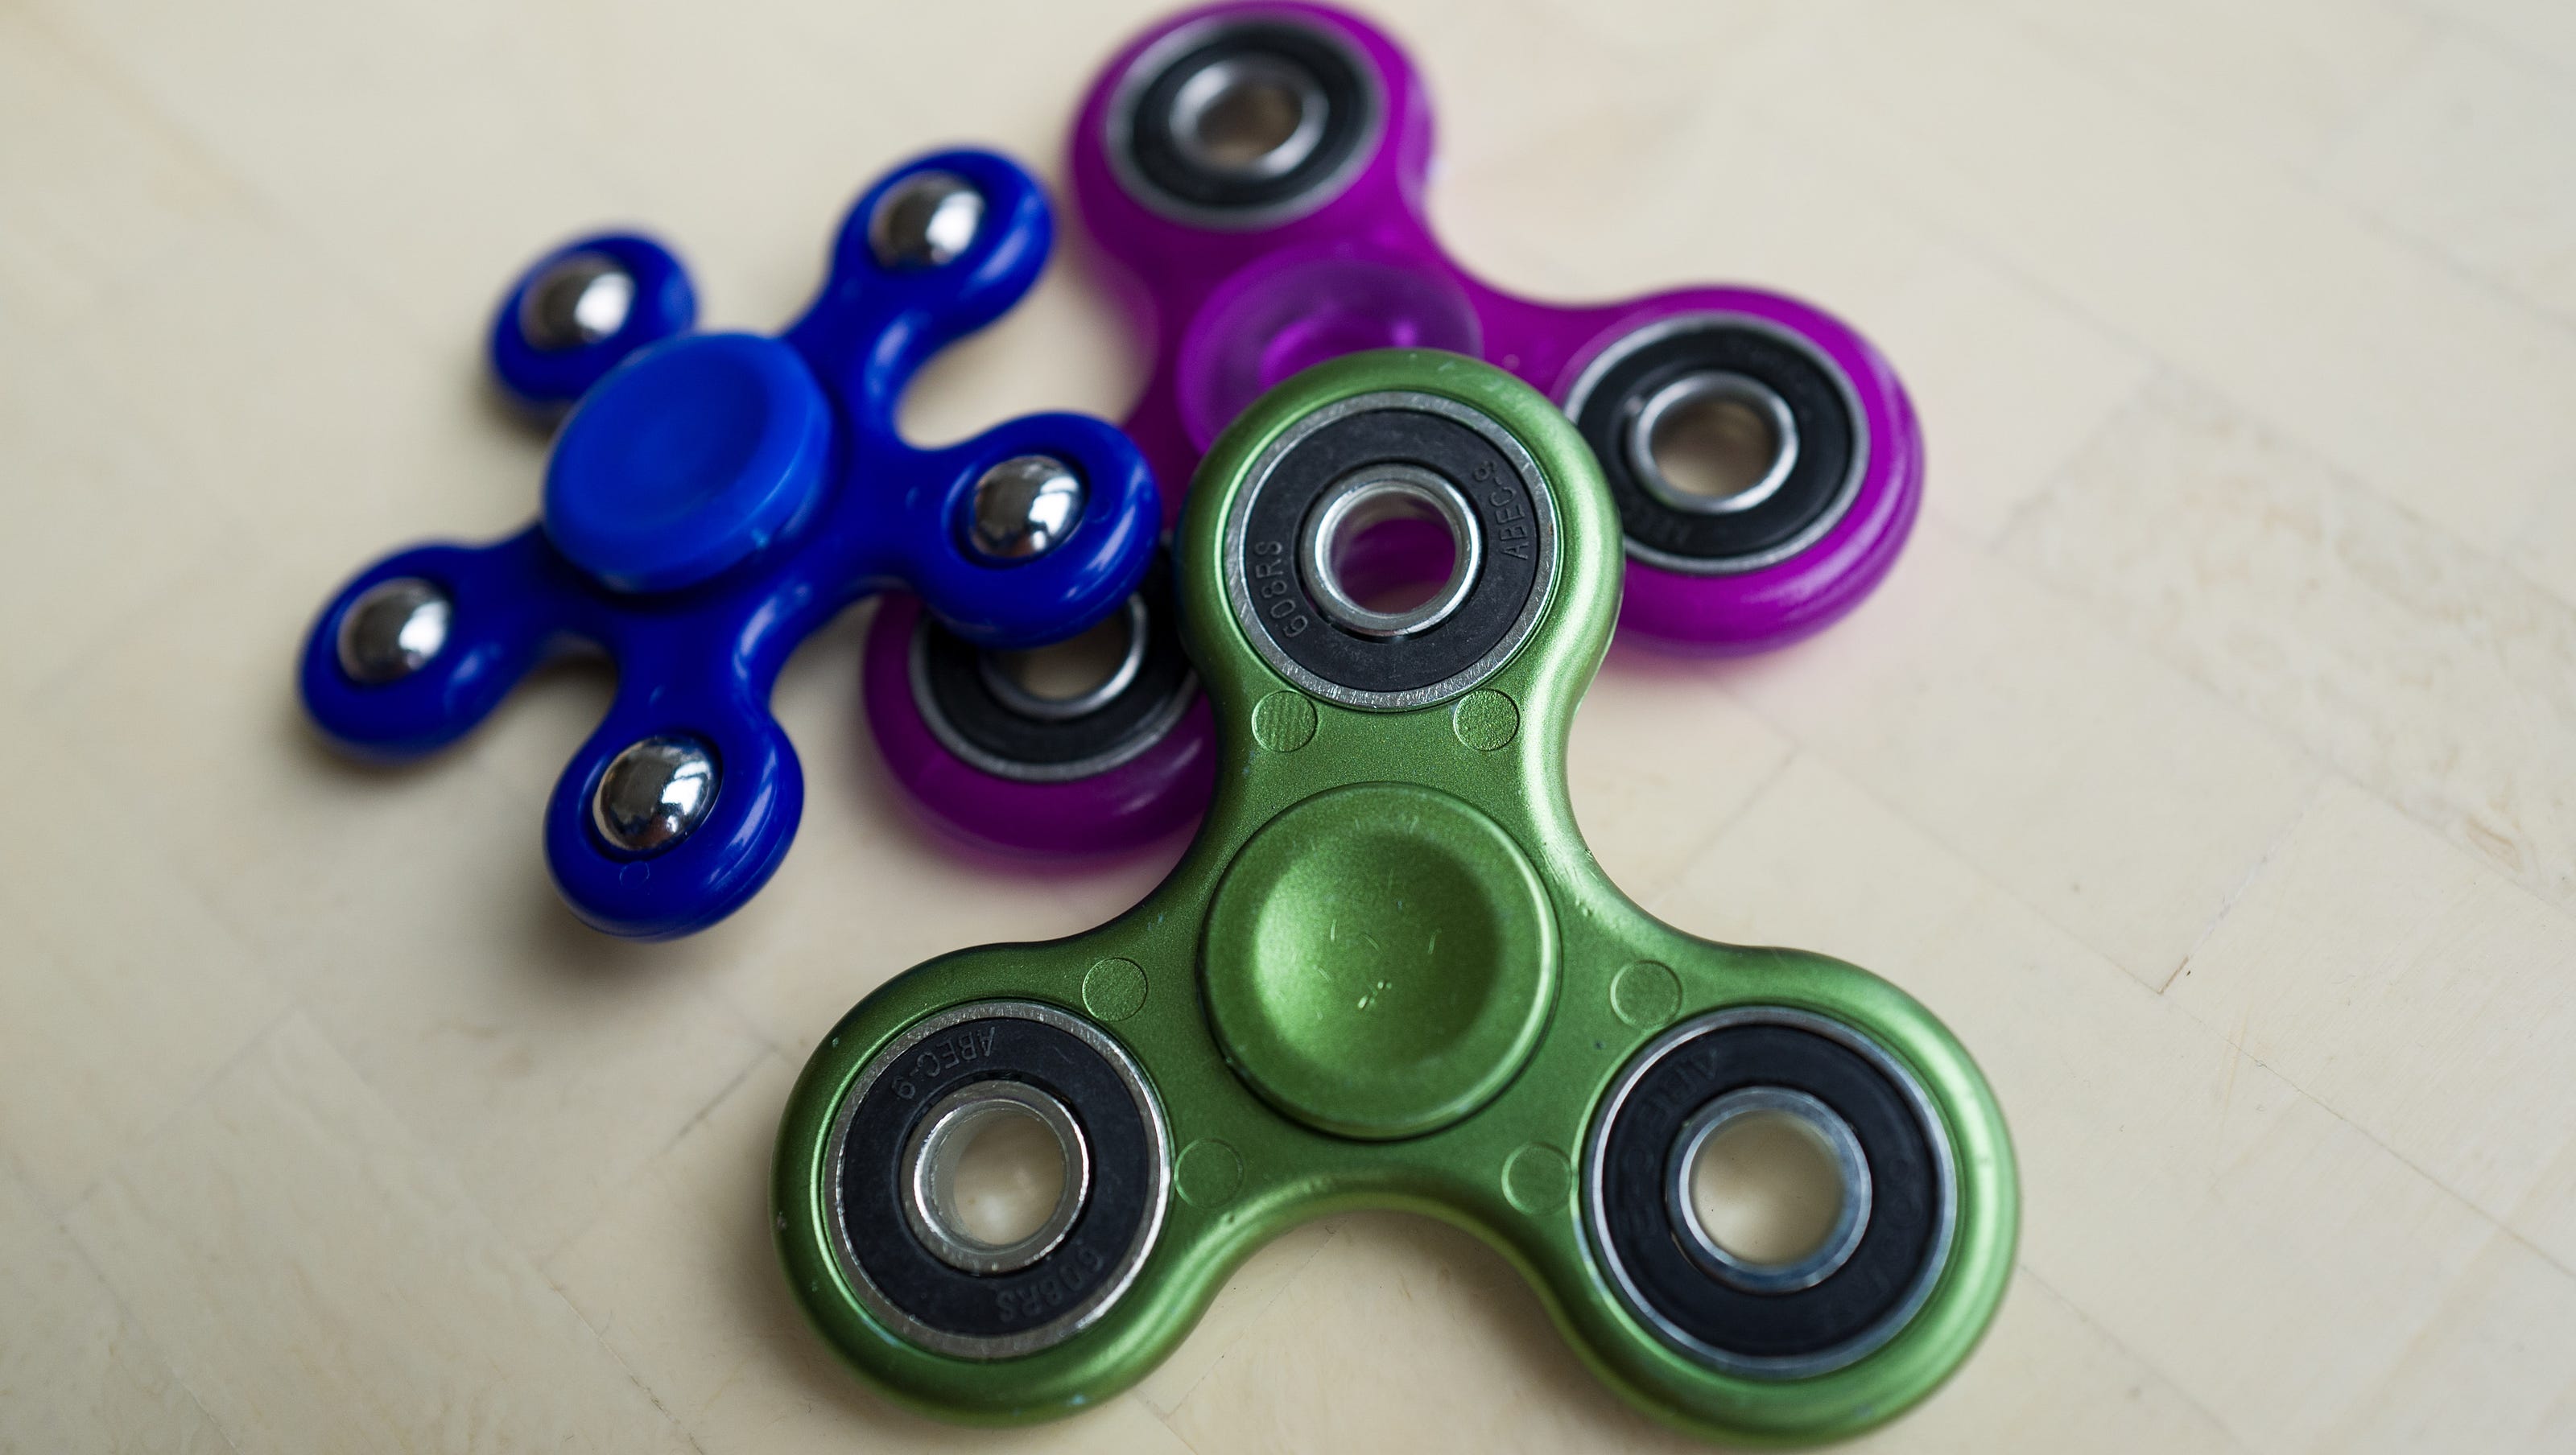 Fidget spinners: Here's how they so darn popular